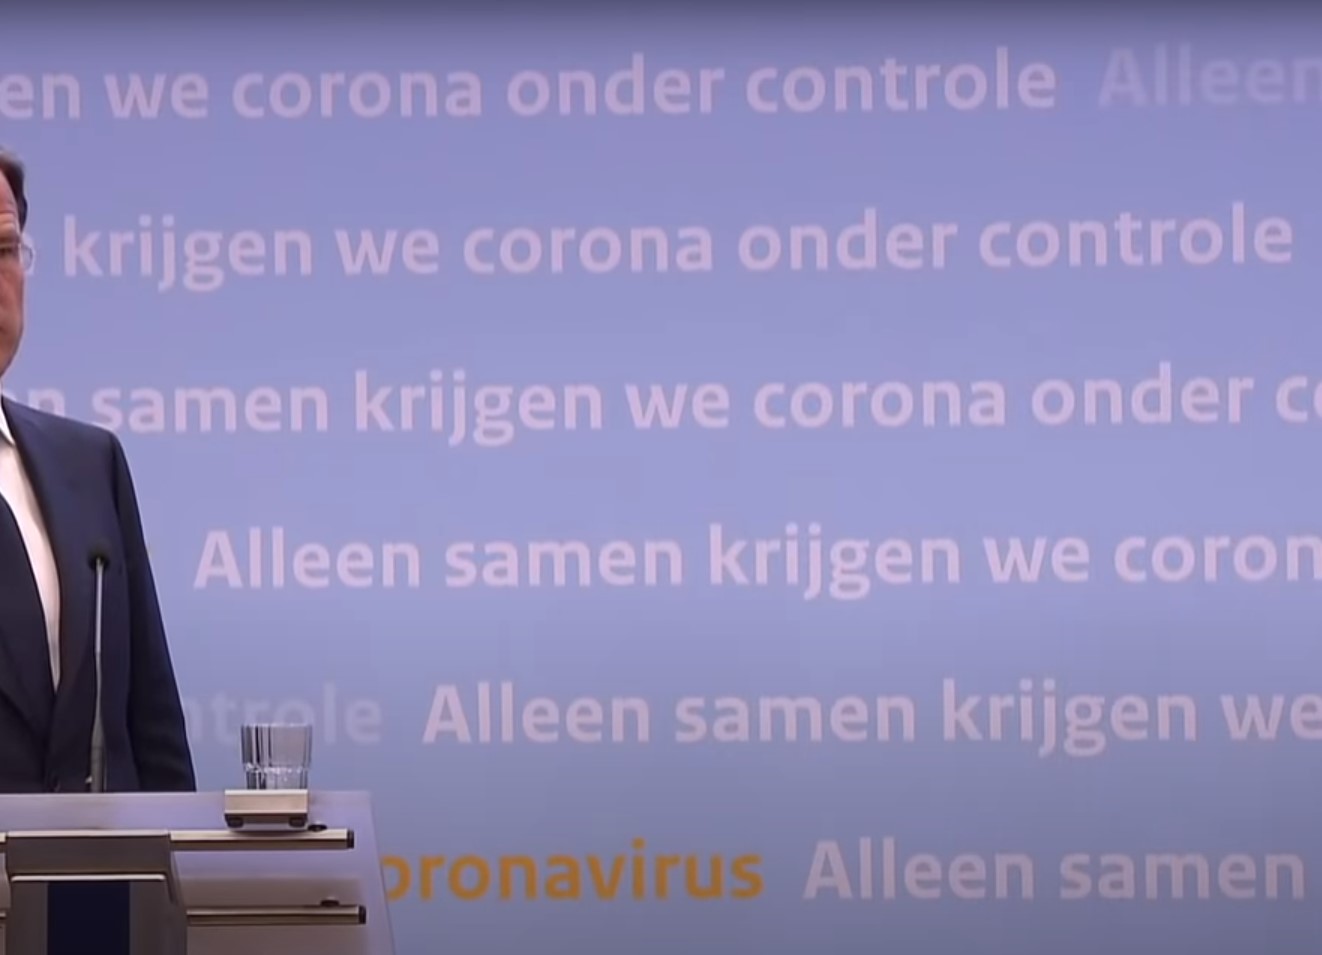 Light blue wall with text behind Prime Minister Rutte